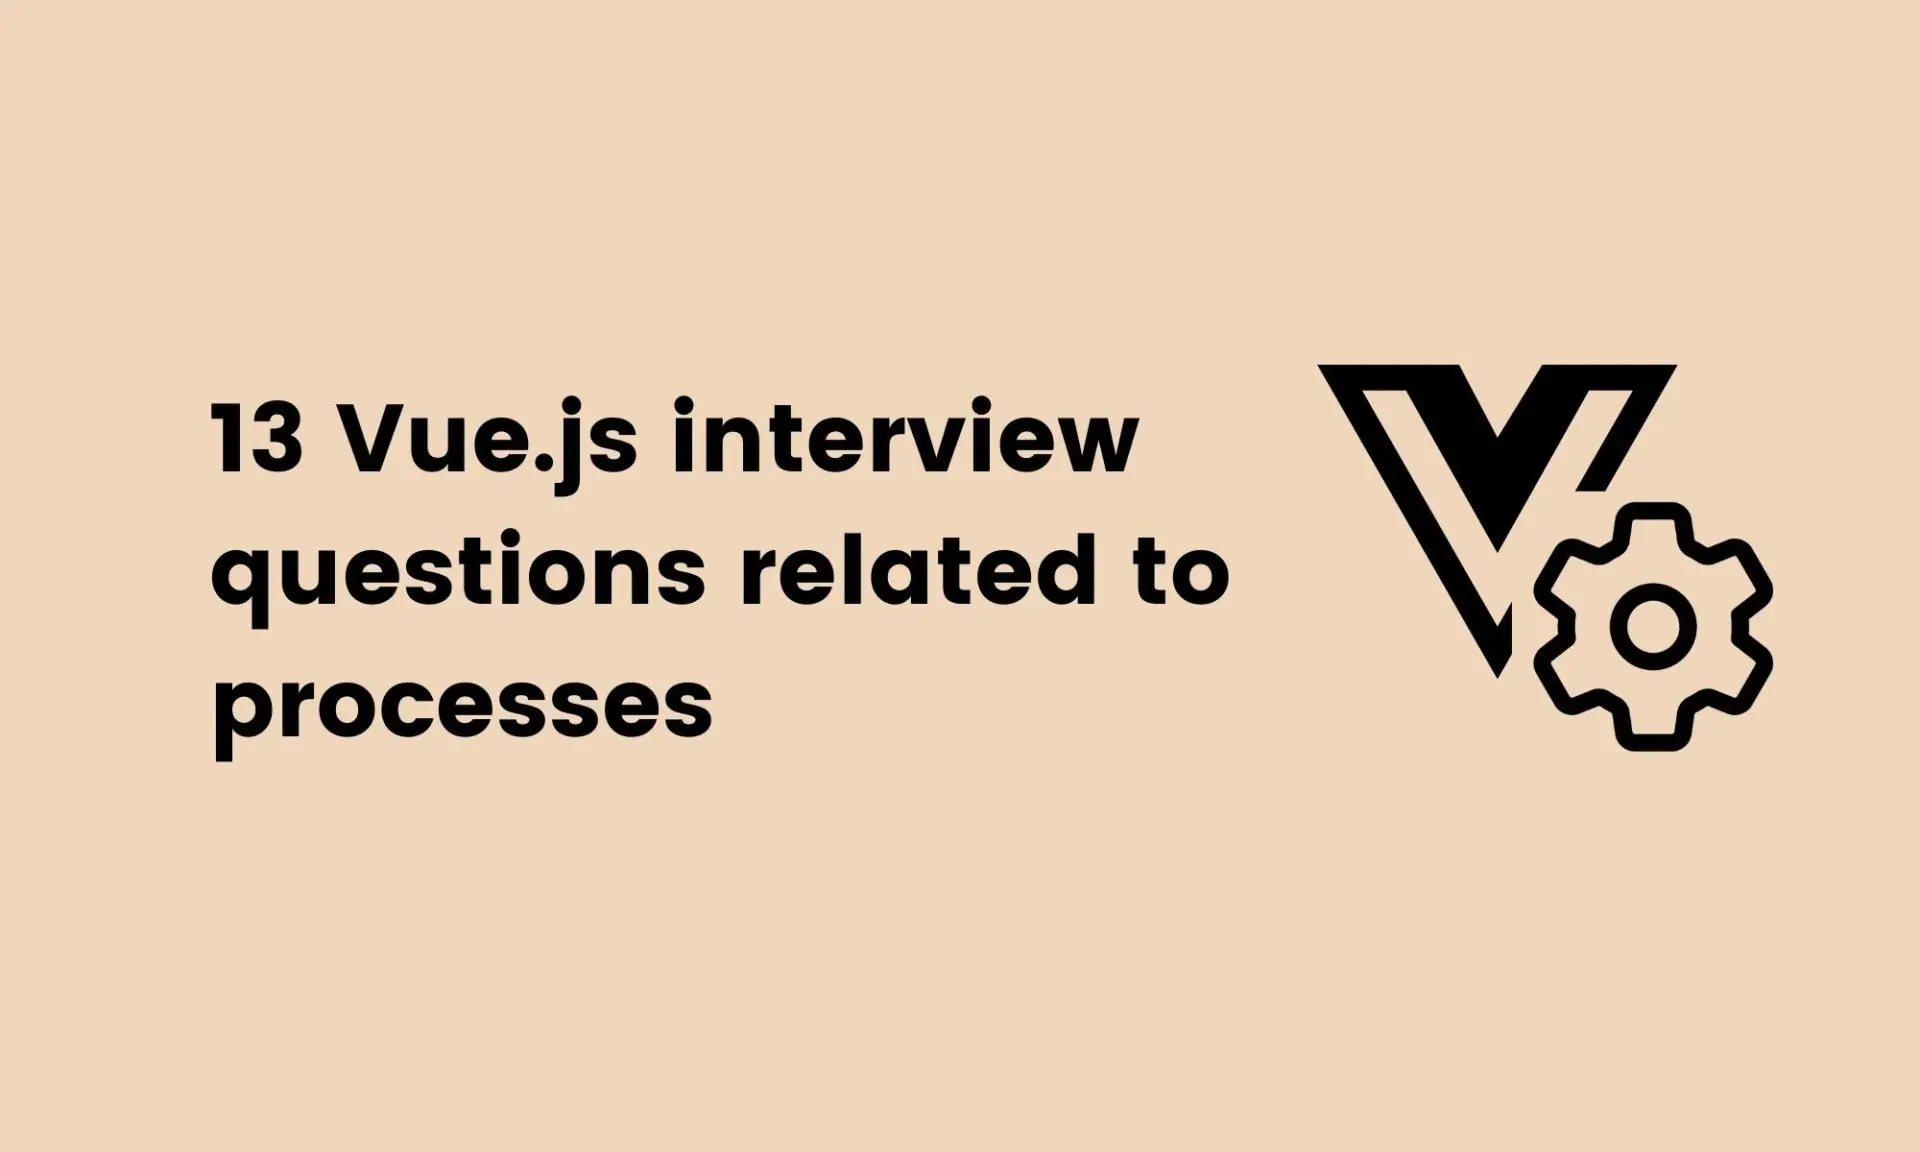 vue.js interview questions related to processes